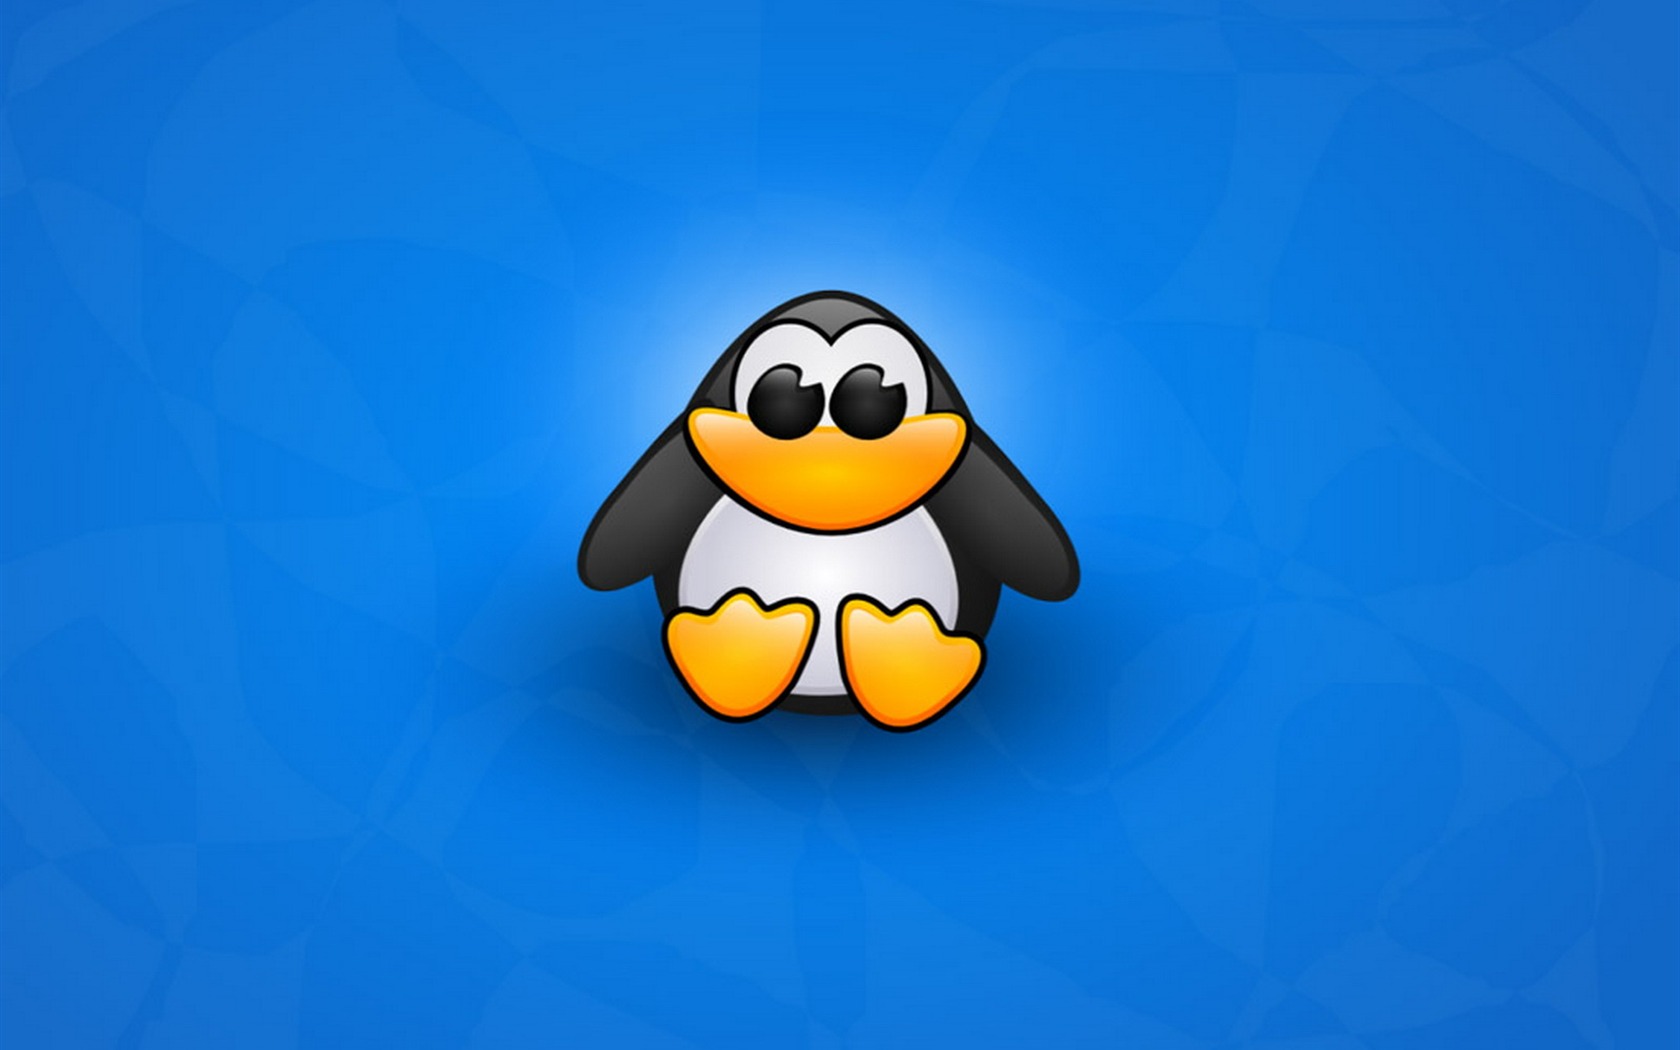 Linux tapety (3) #15 - 1680x1050